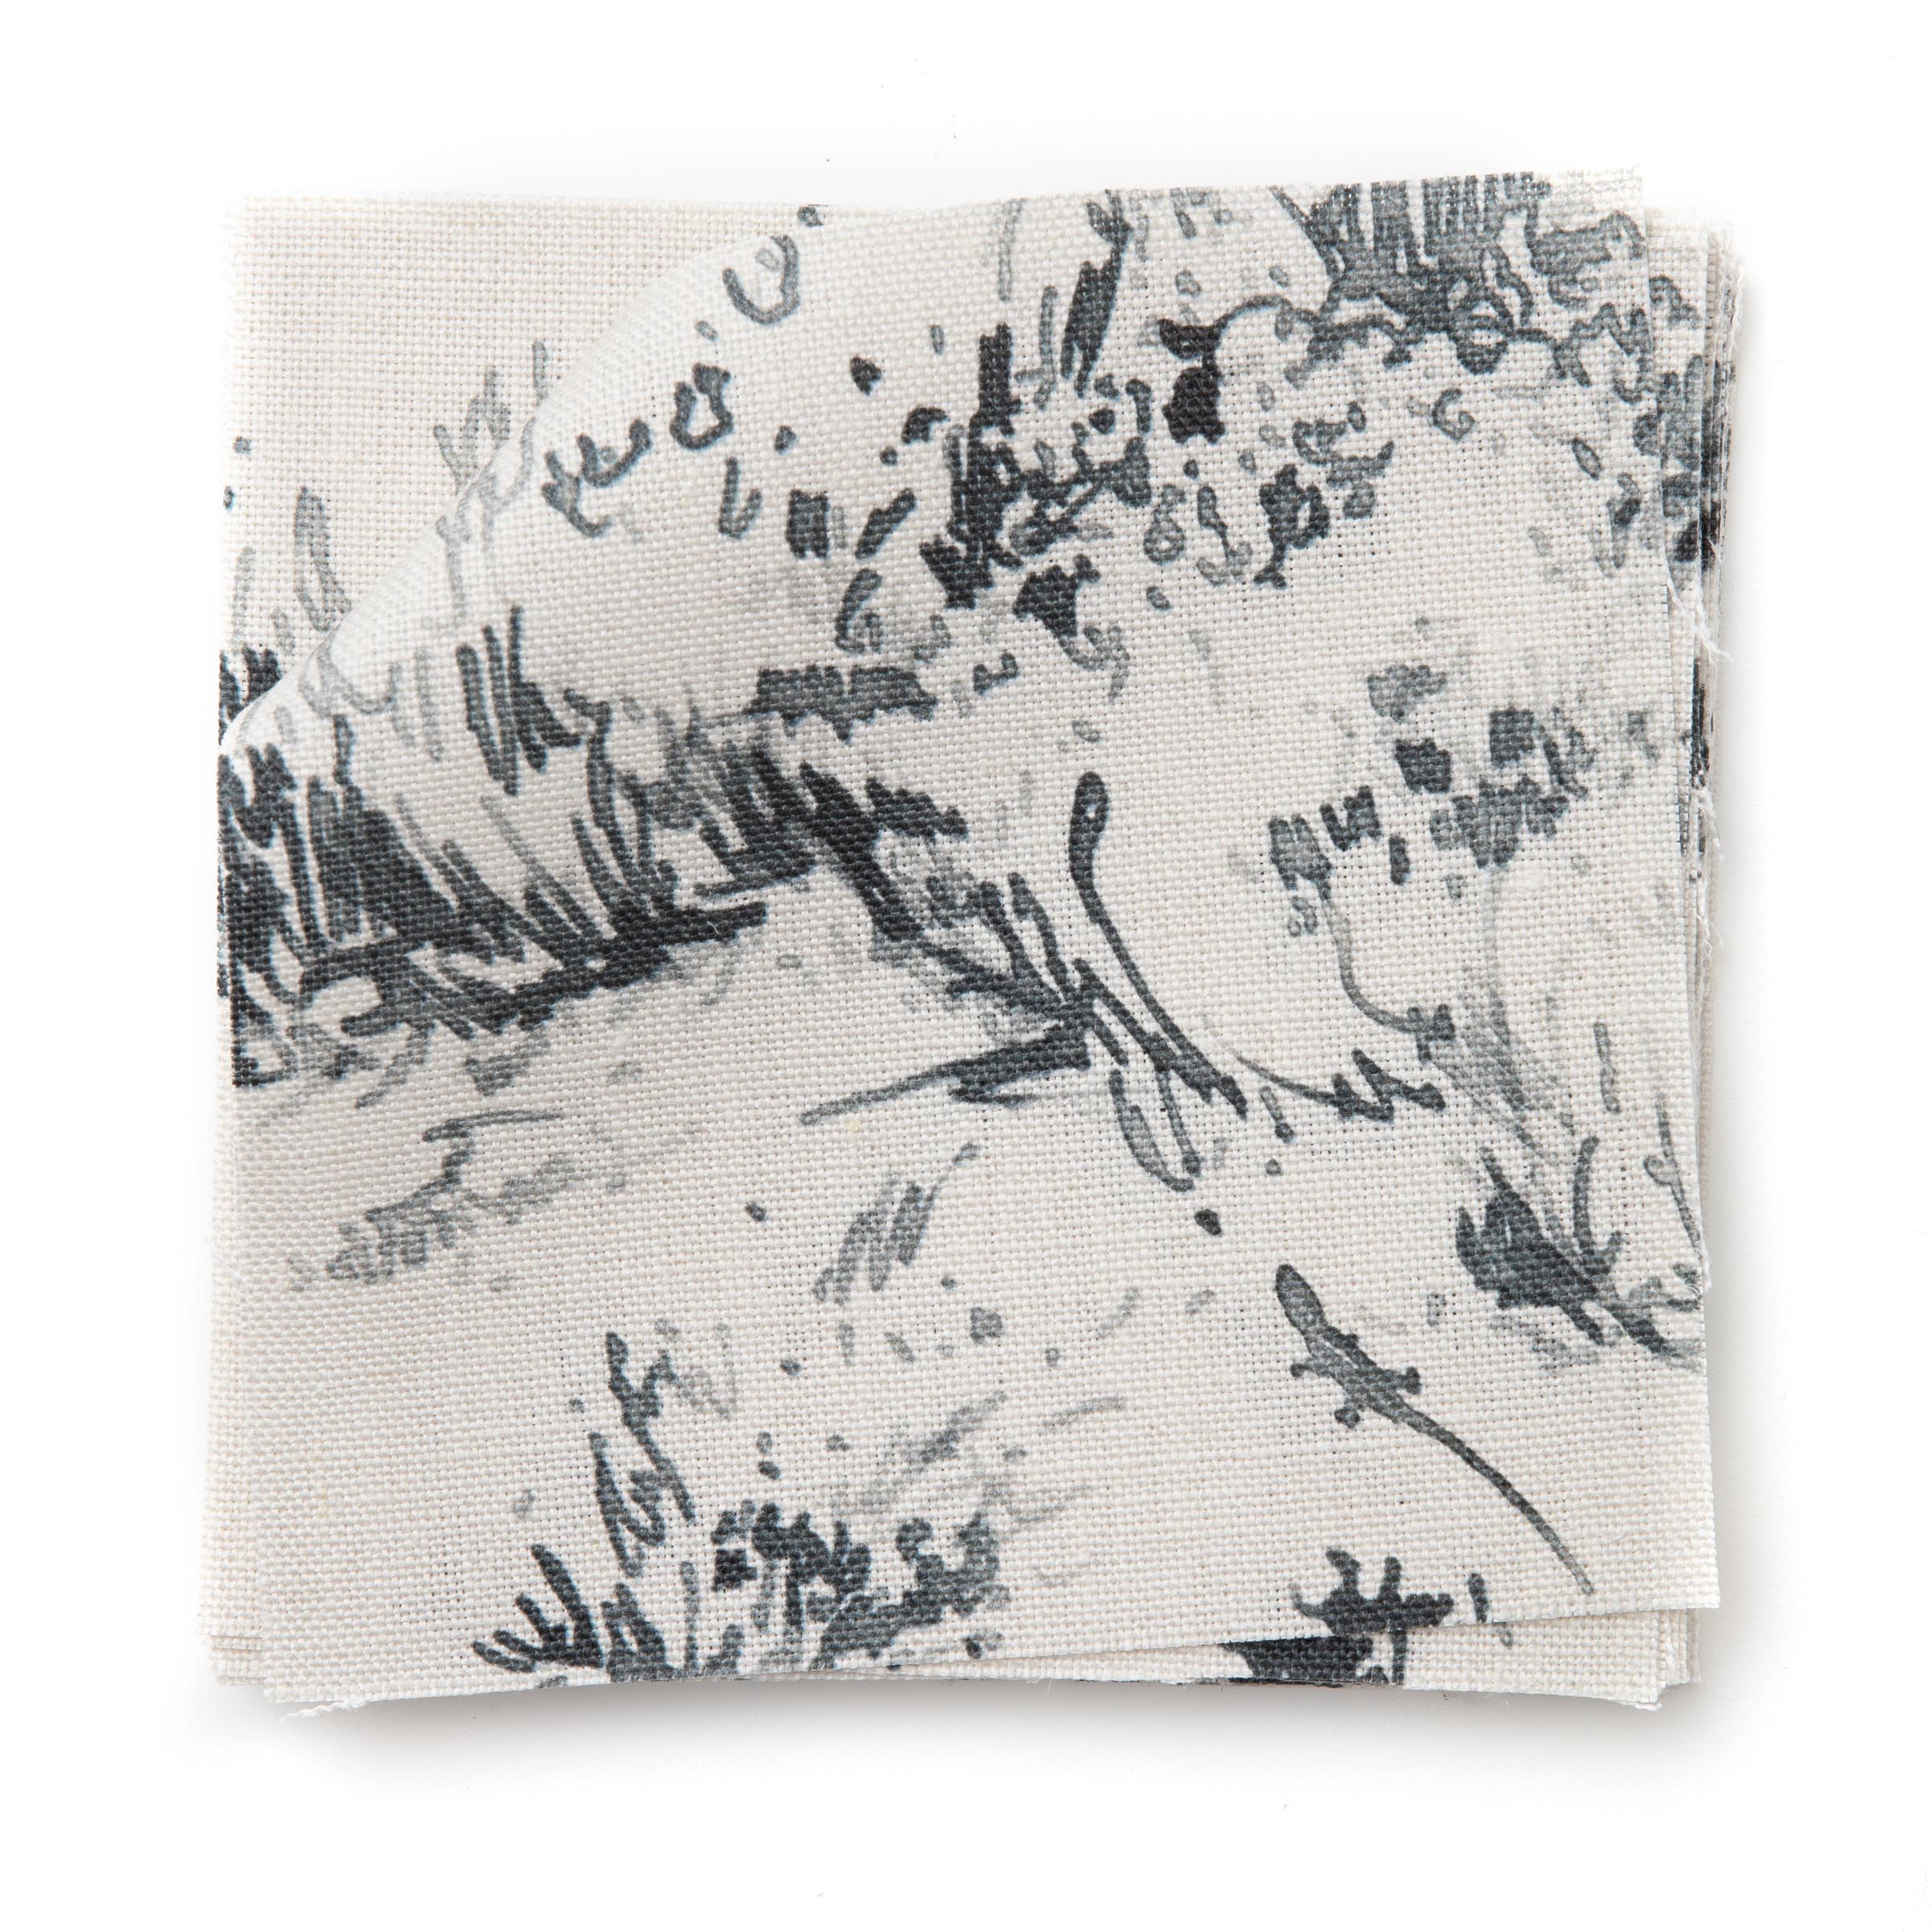 A stack of fabric swatches in a painterly shrub and tree print in navy on a cream field.